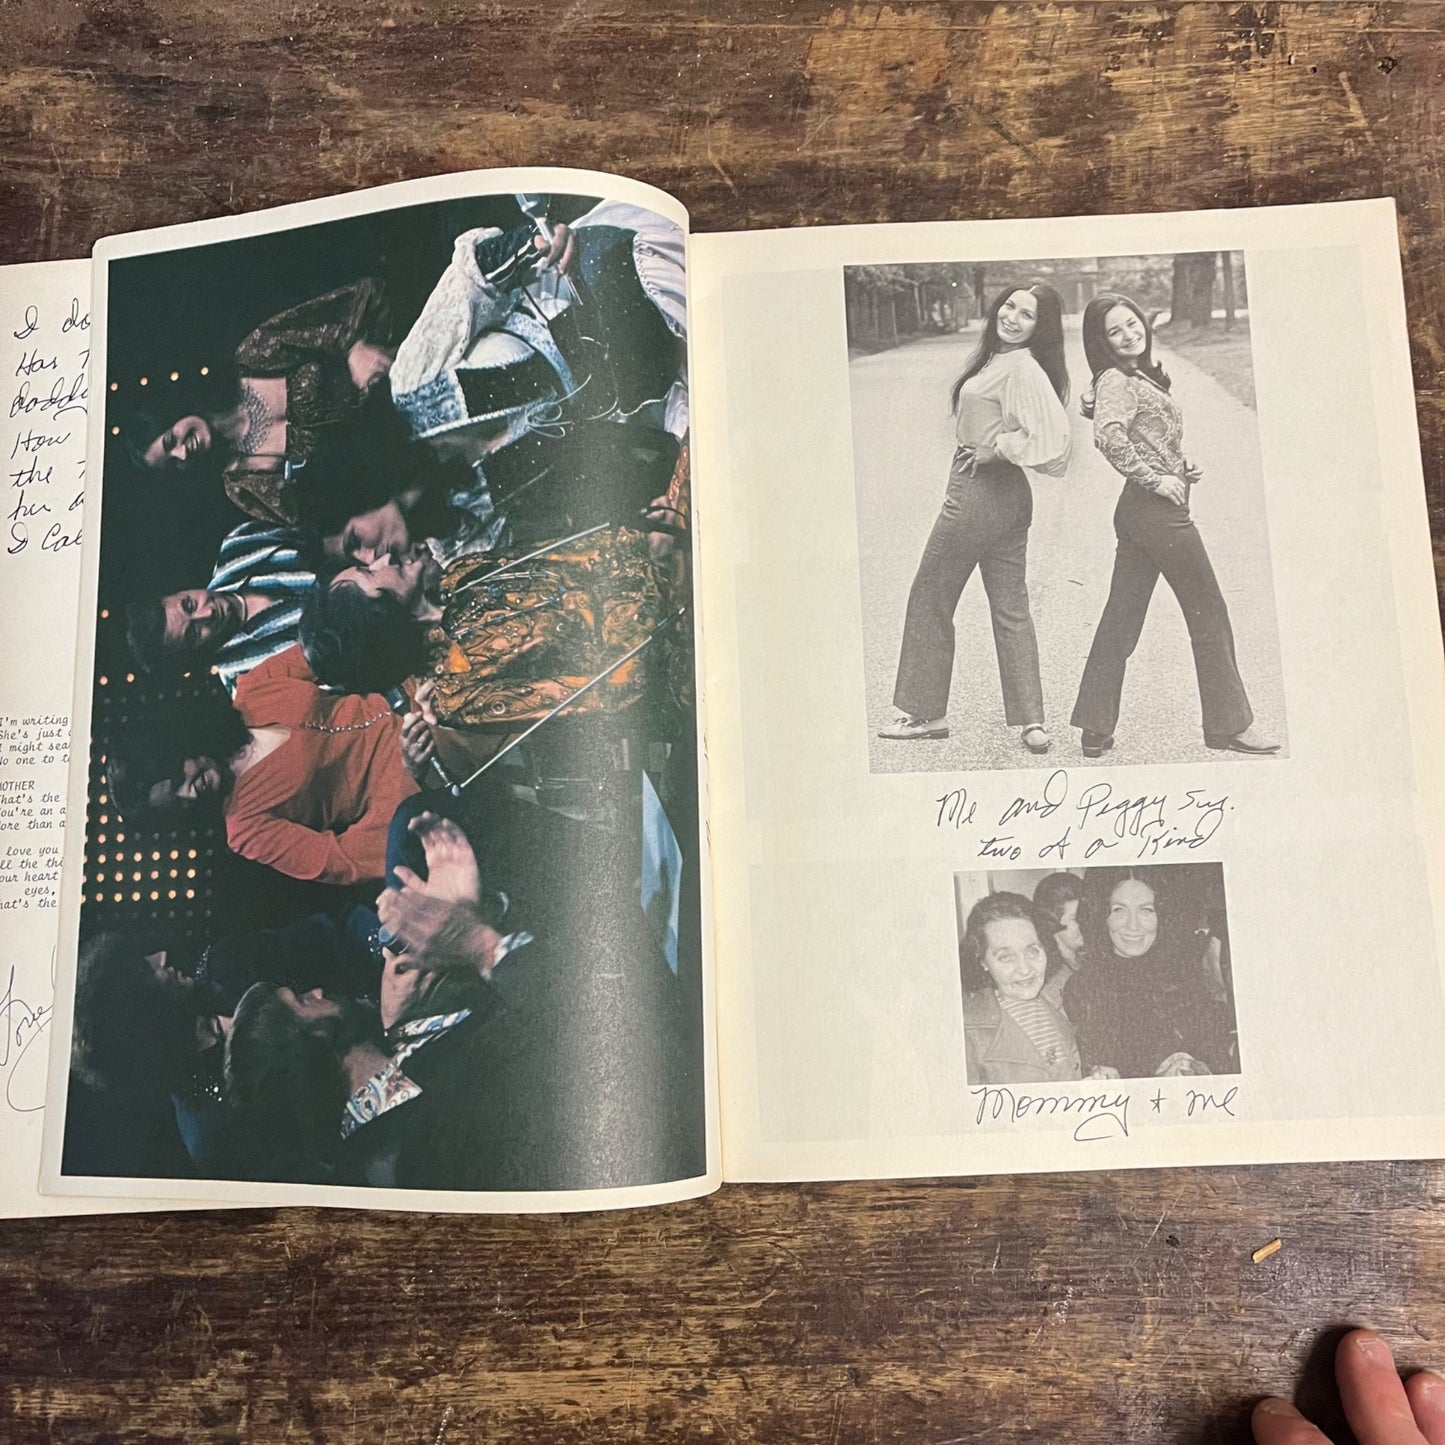 Vintage Loretta Lynn Autobiography Booklet "Me and Mine" Signed by Sister Peggy Sue